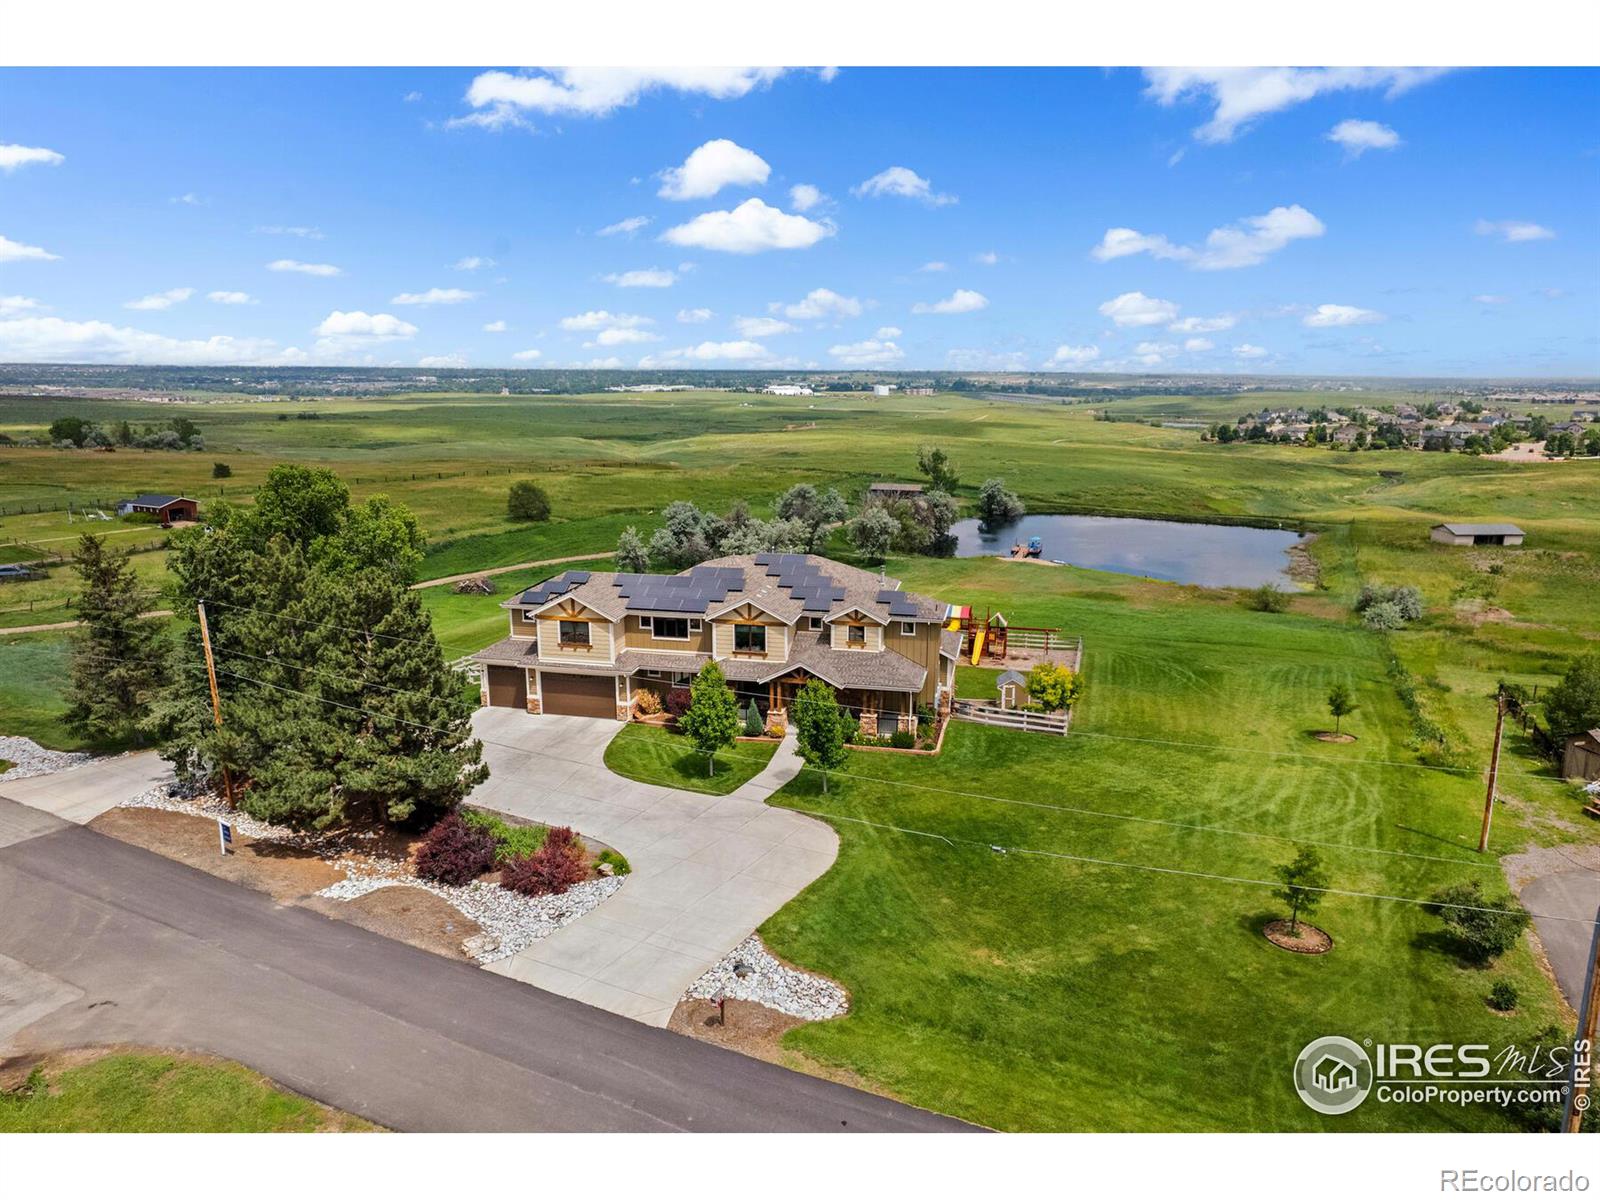 12681  appaloosa place, Broomfield sold home. Closed on 2024-02-02 for $3,050,000.